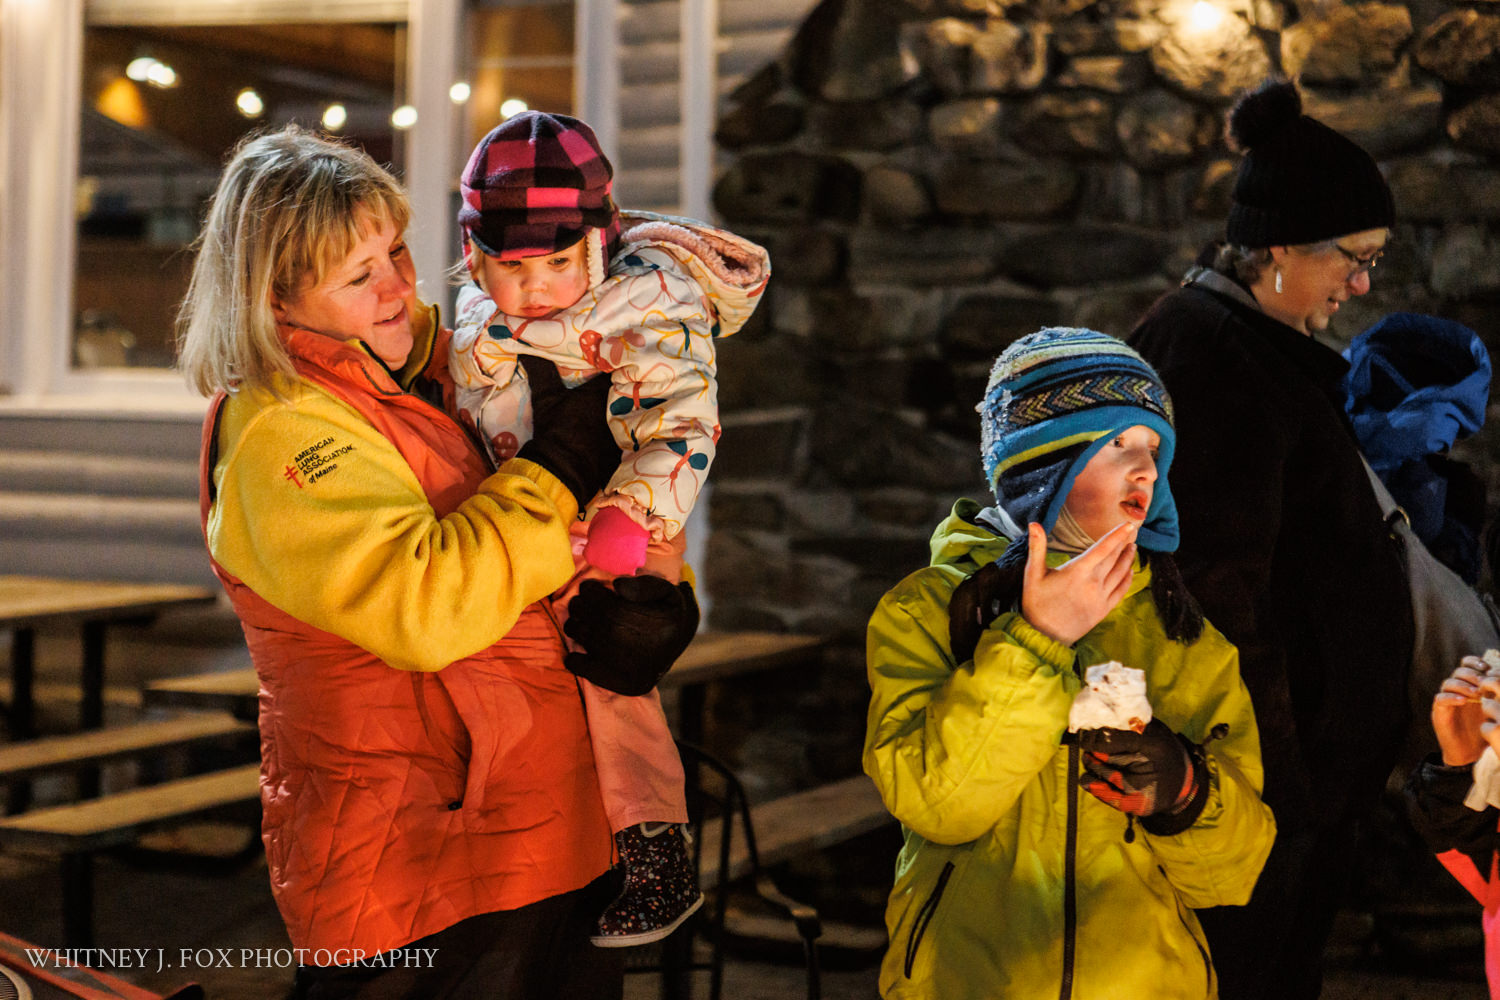 334 winter kids welcome to winter 2022 lost valley auburn maine documentary event photographer whitney j fox 3652 w